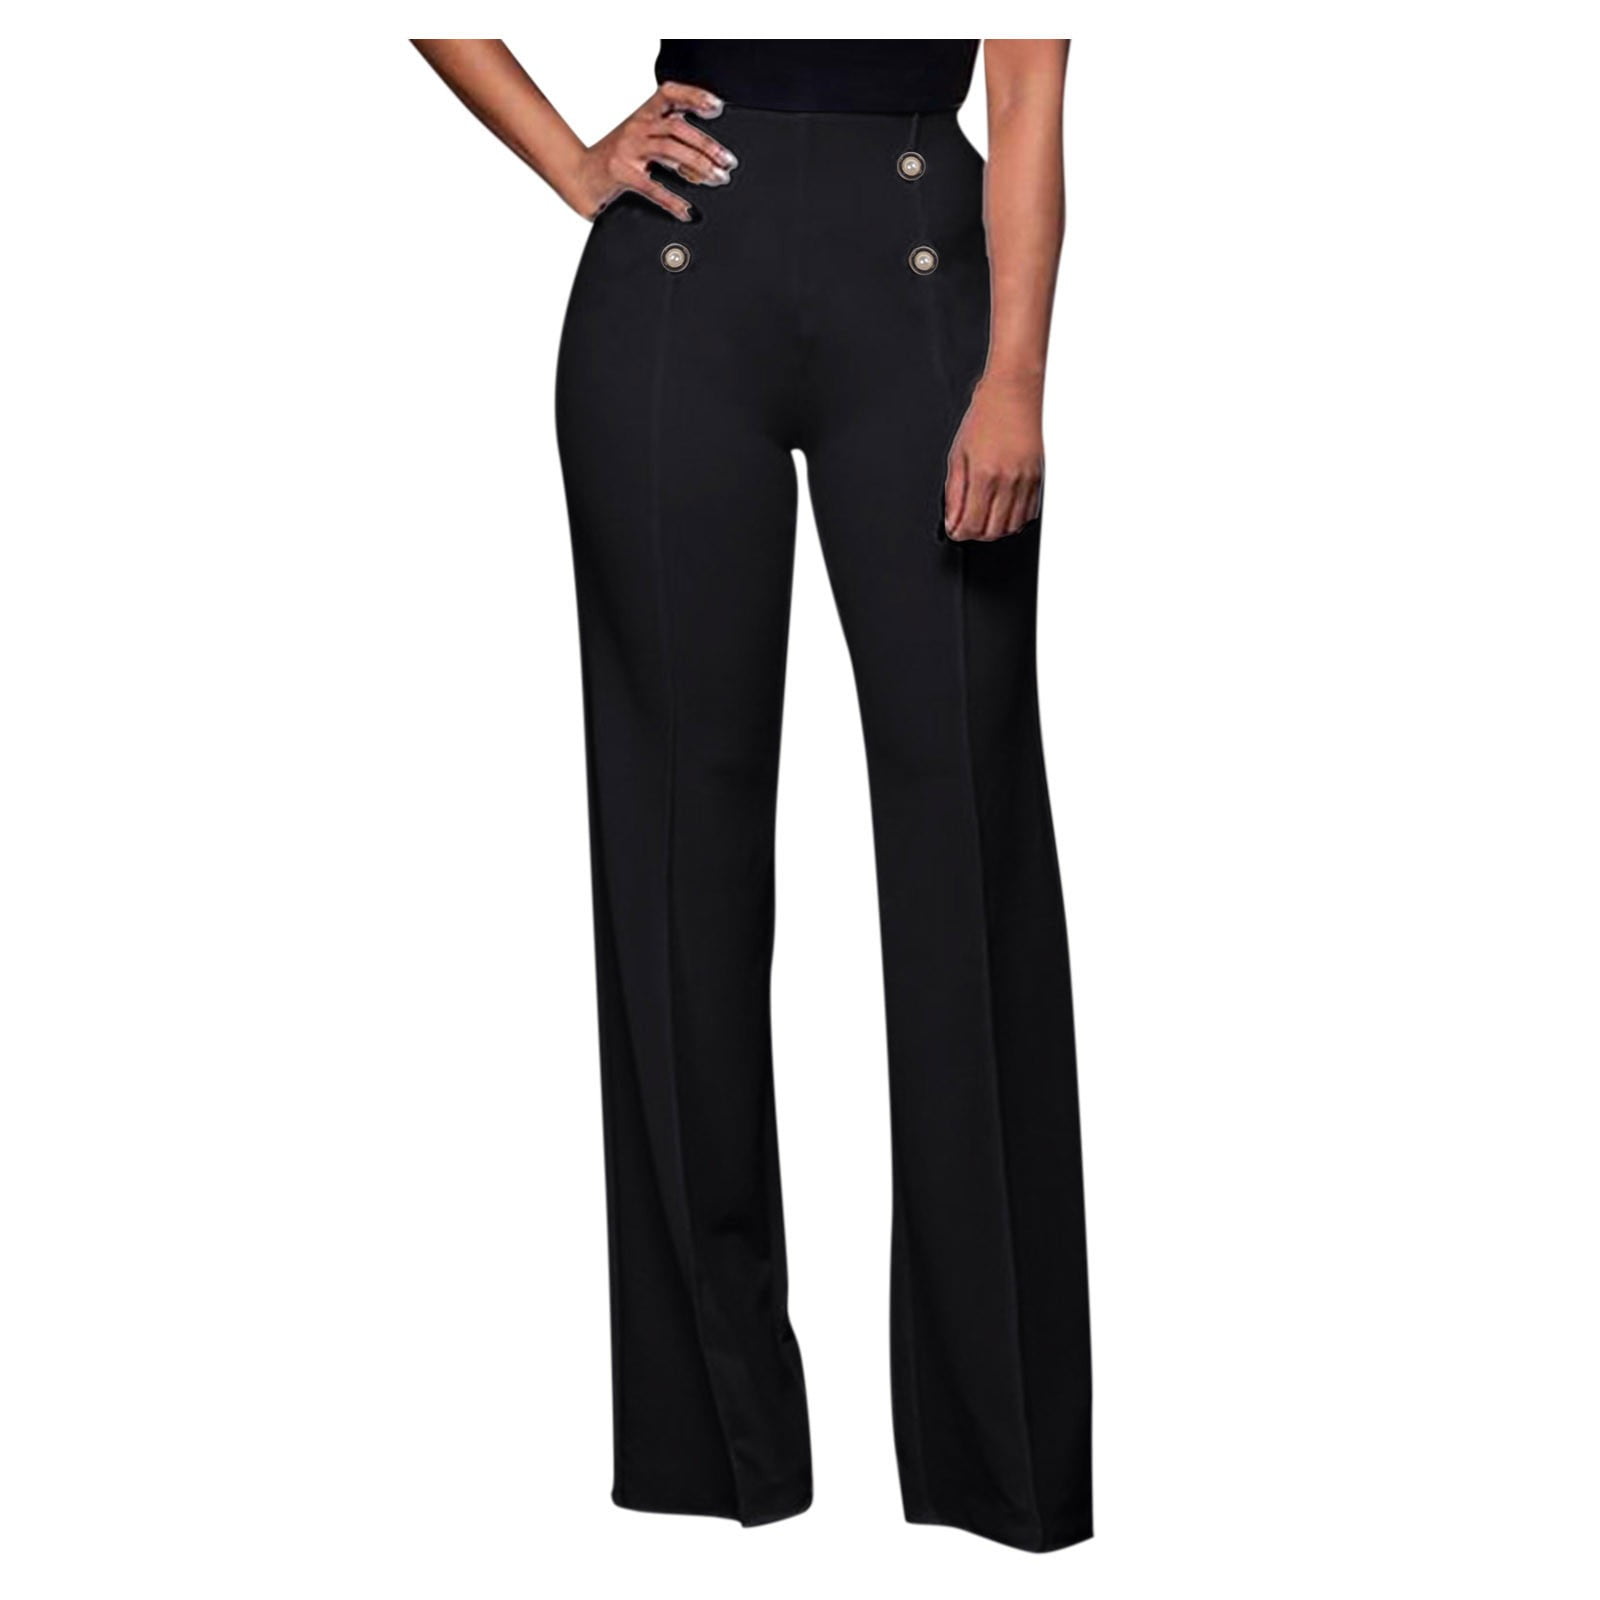 fvwitlyh Pants for Women Business Casual Pants for Women Curvy Pants ...